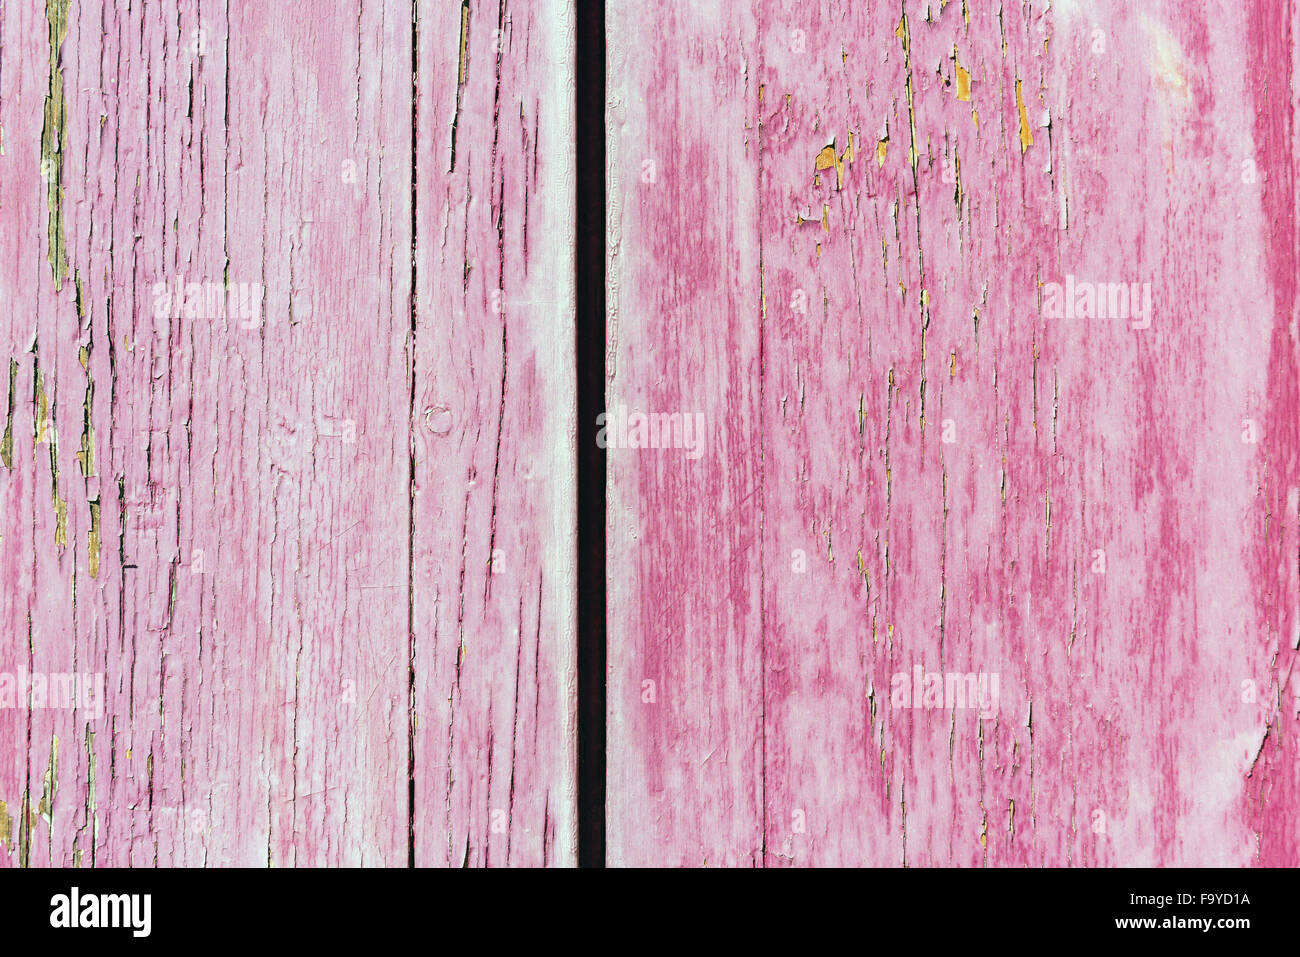 Old Wooden planks fond surface texture rose. Banque D'Images